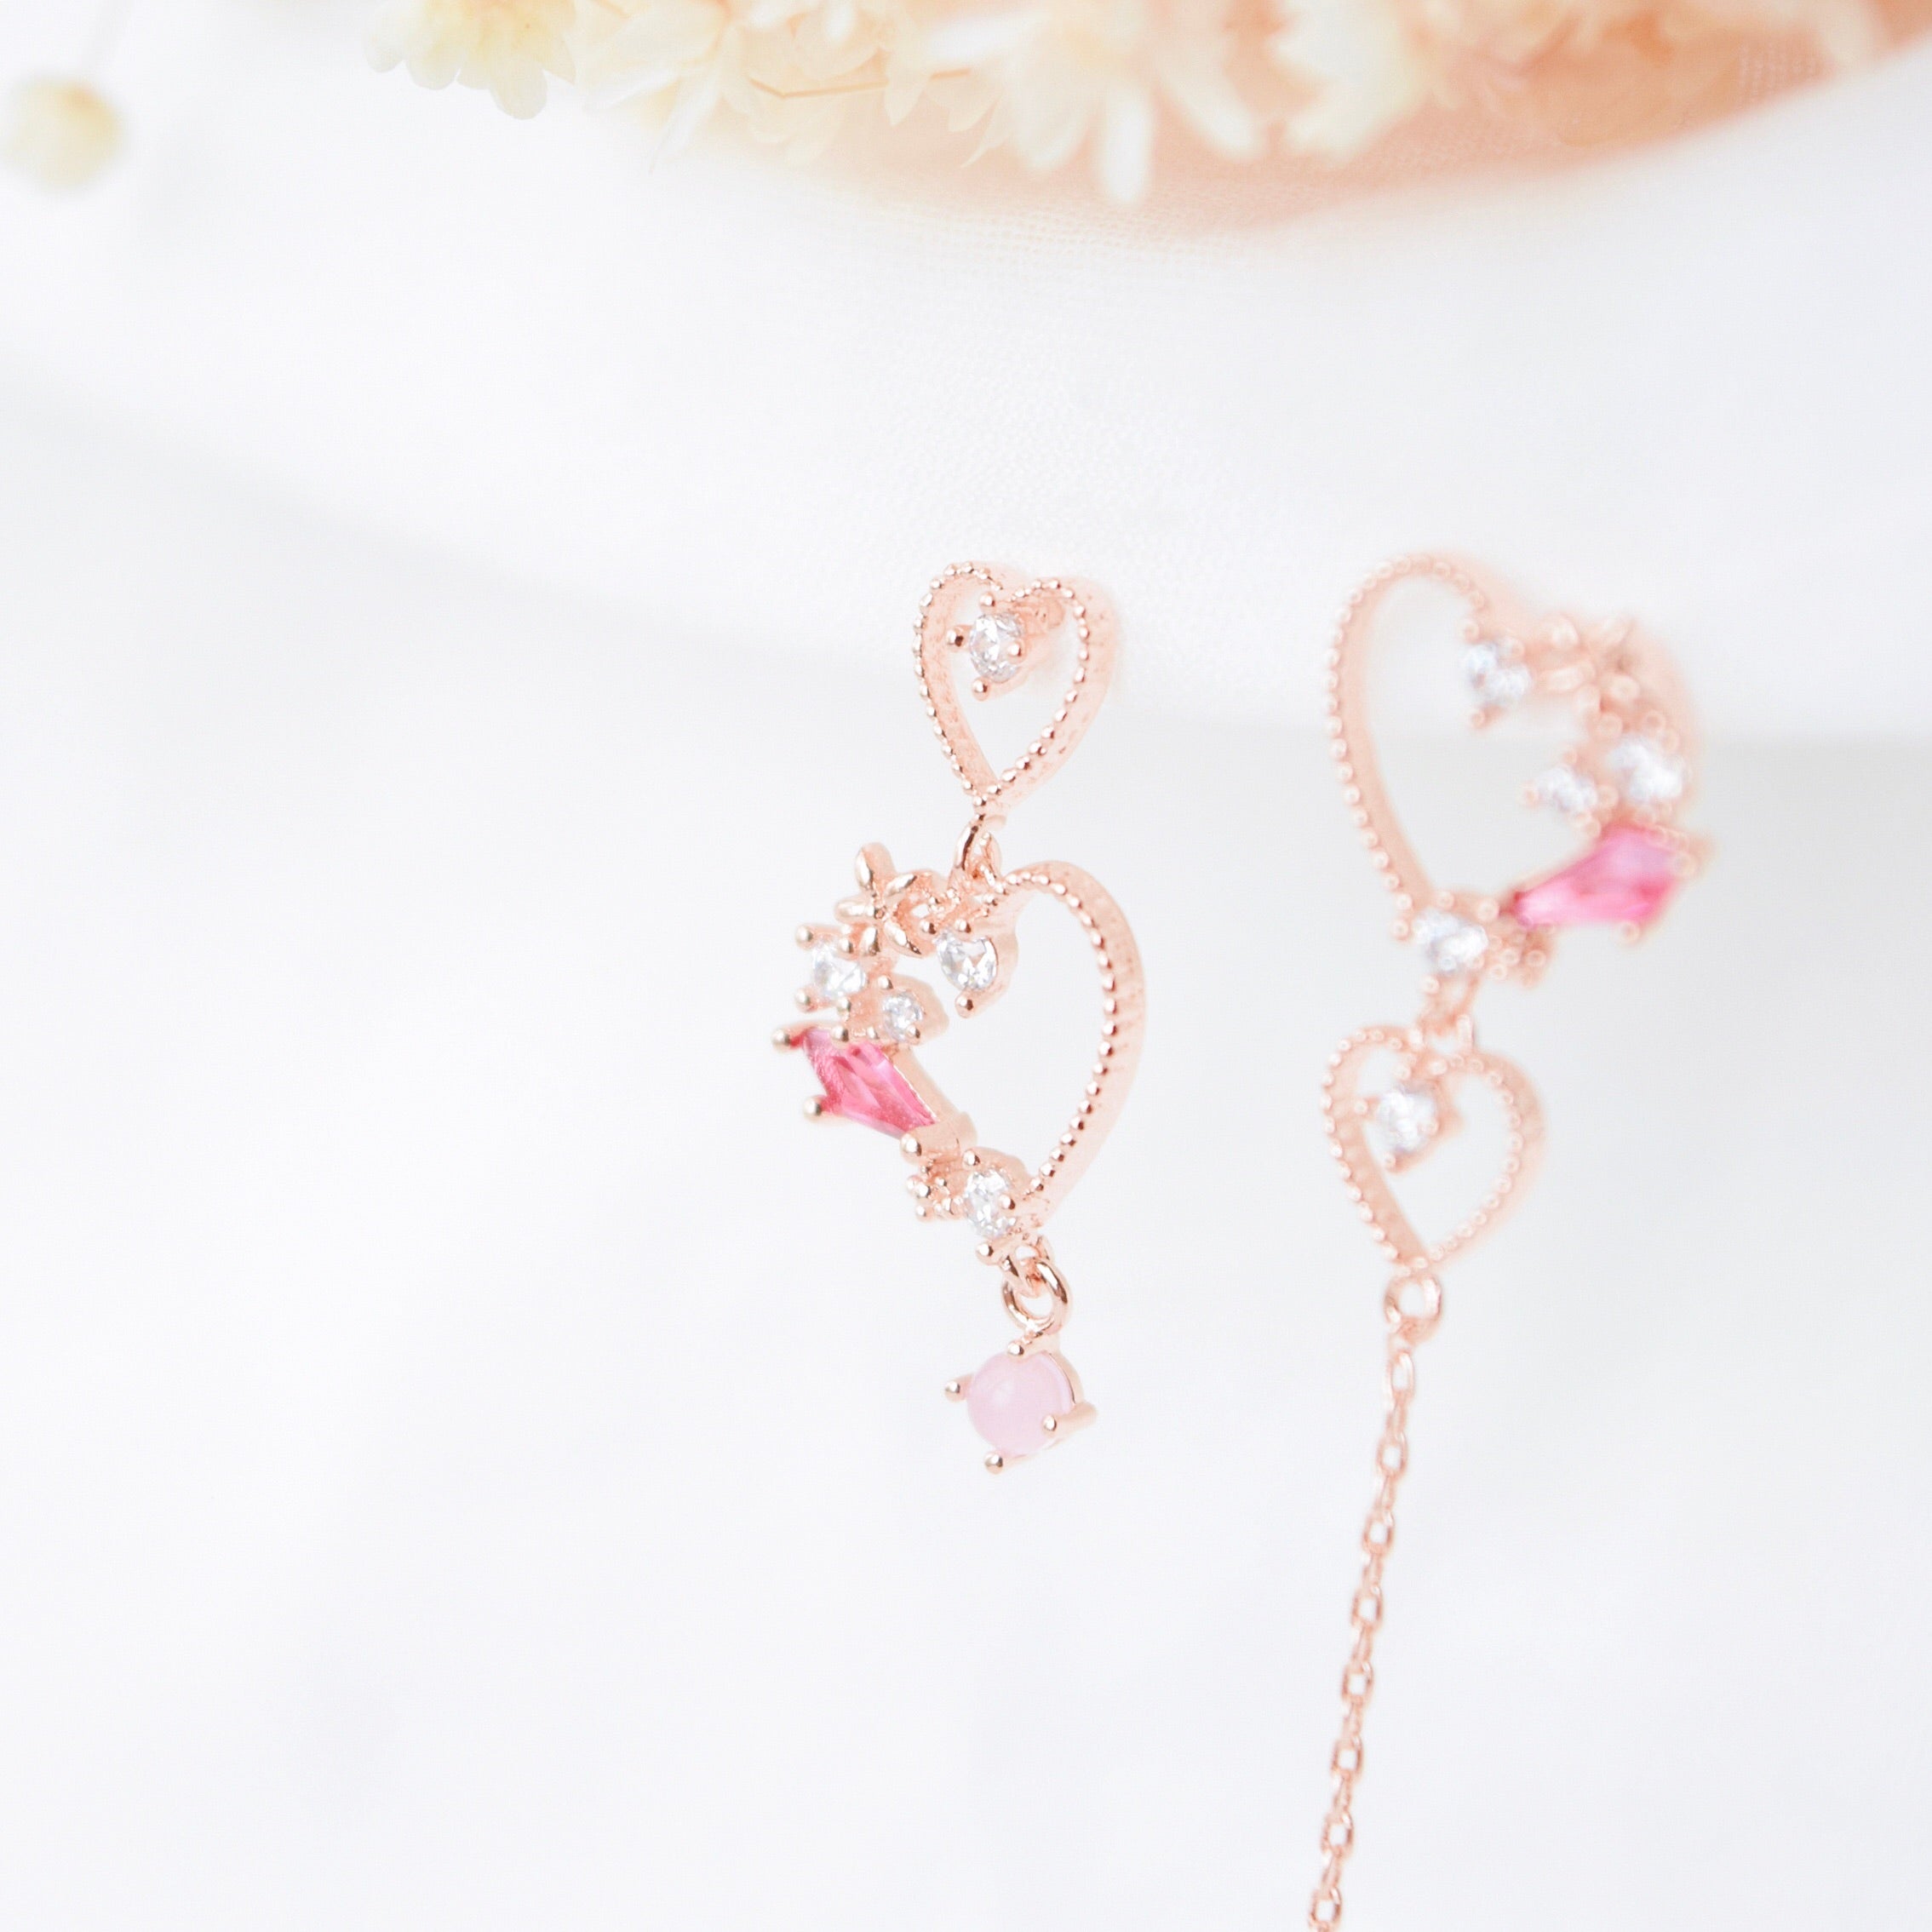 Rose Gold Korea Made Earrings Local Brand in Malaysia Cubic Zirconia Dainty Delicate Minimalist Jewellery Jewelry Bridal Bride Clip On Earrings 925 Sterling Silver